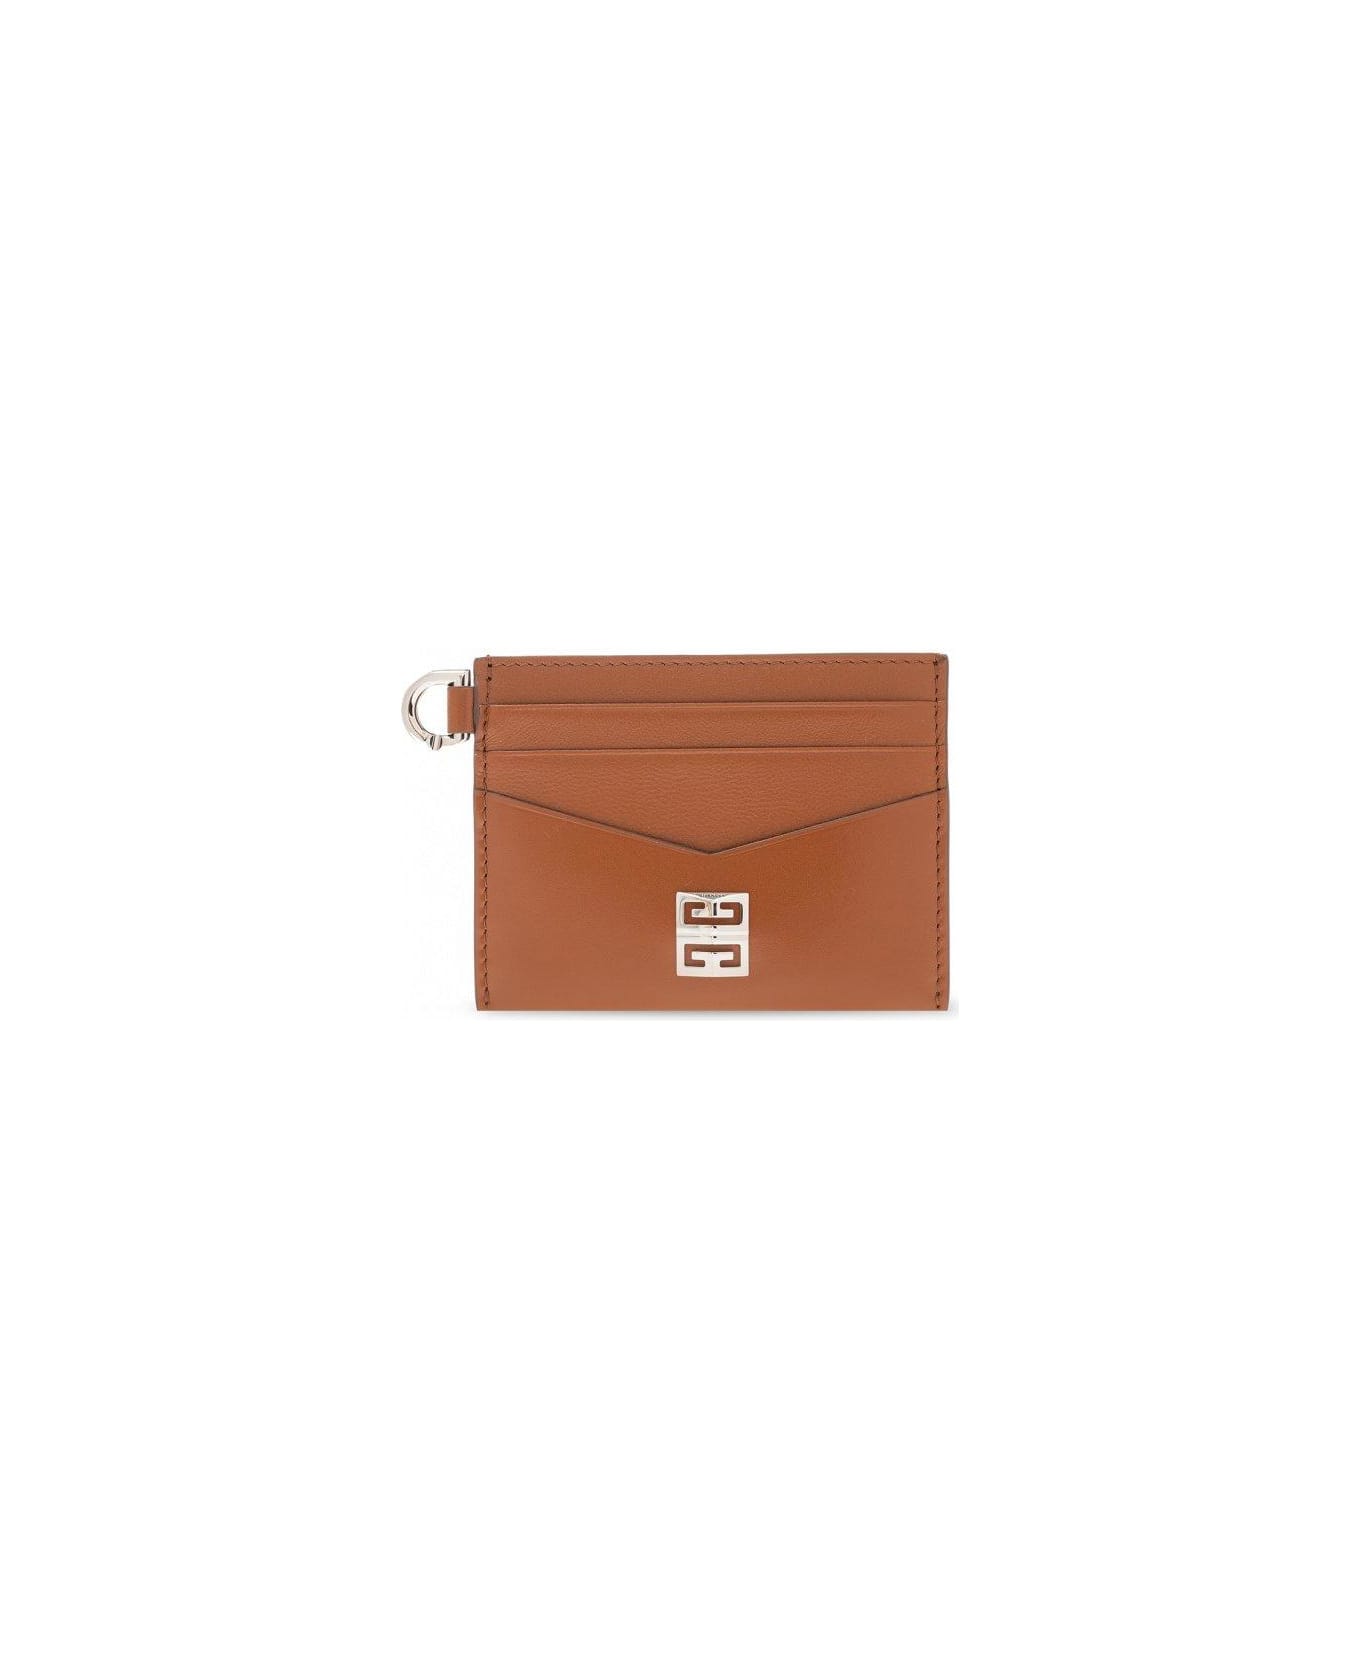 Givenchy 4g Card Holder - BROWN 財布